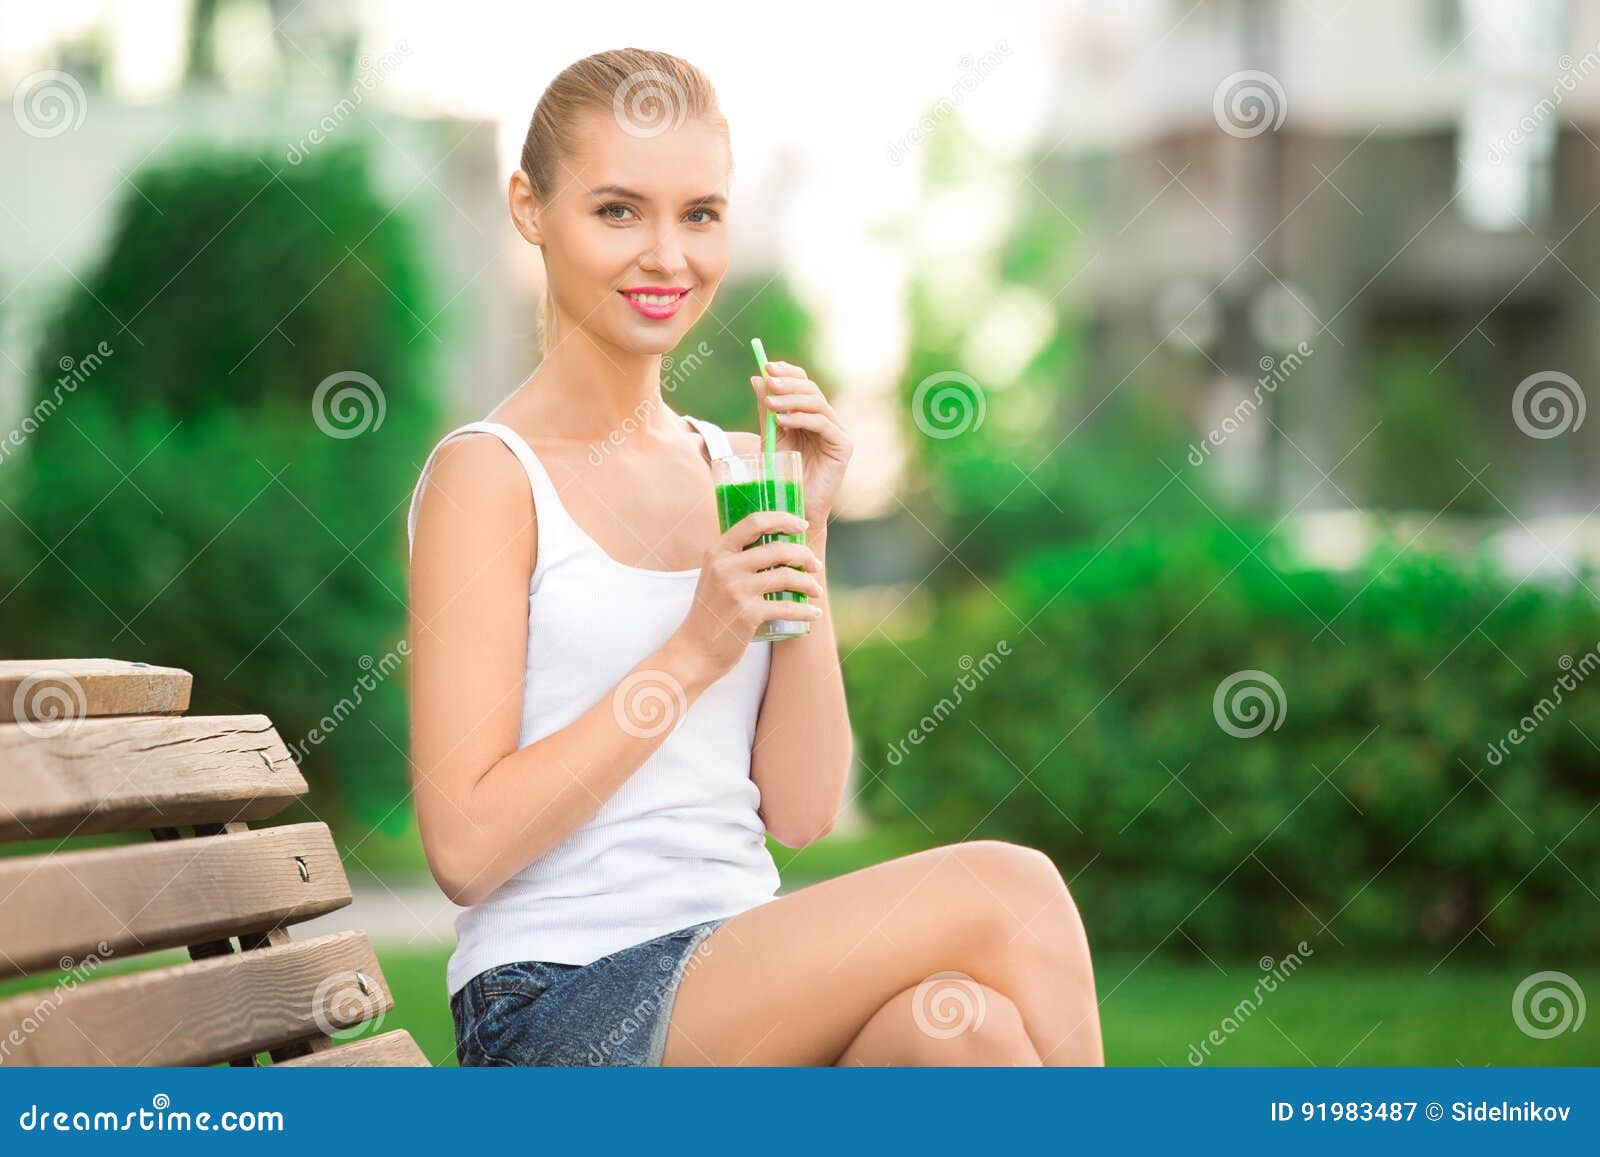 Young Woman Drink Smoothie Healthy Detox Outdoors Stock Image Image Of Outdoors Beverage 